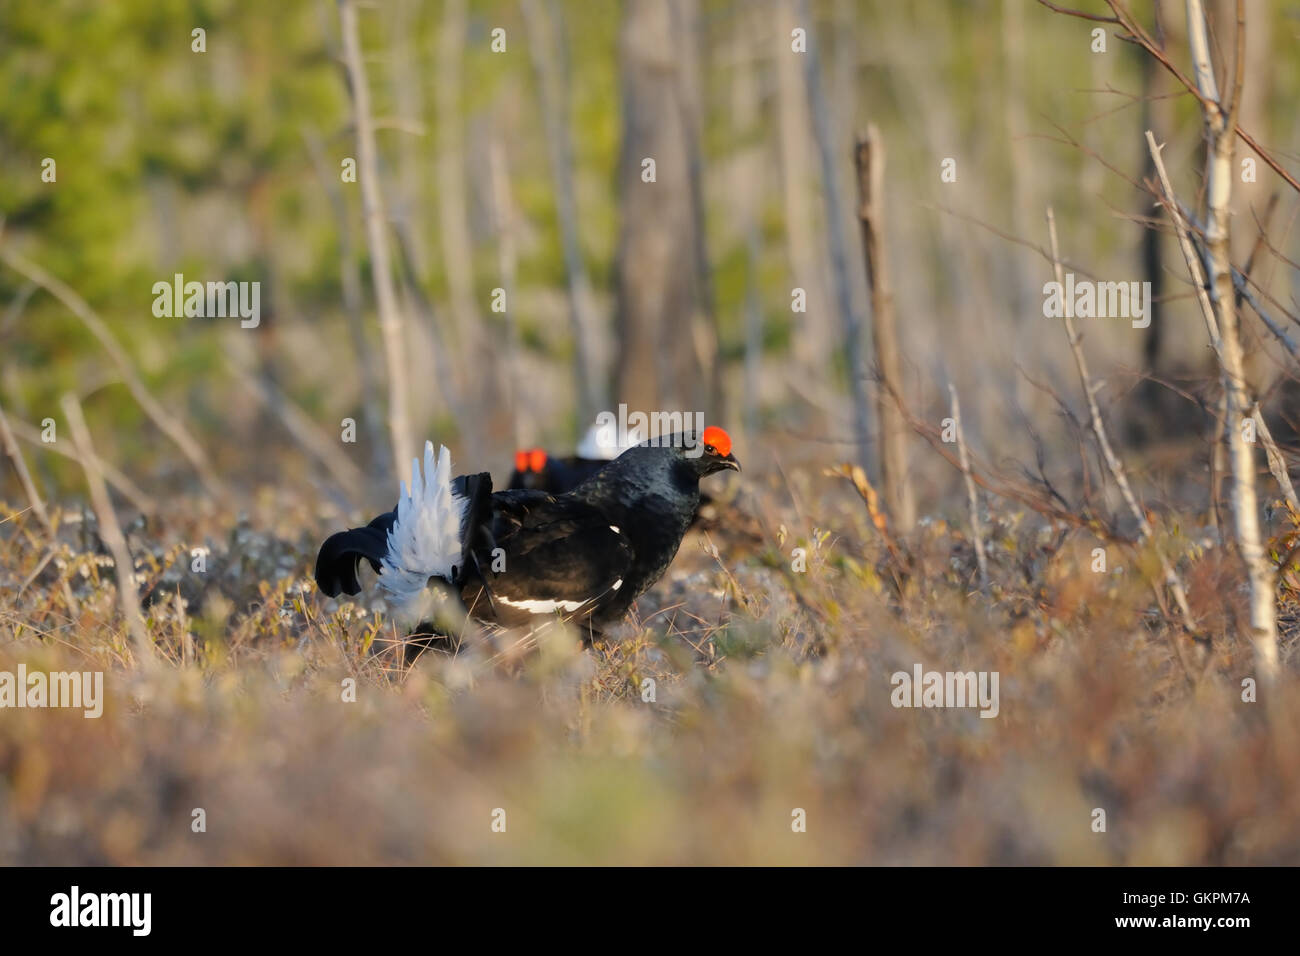 Male Black Grouses (Tetrao tetrix) at swamp courting place early in the morning. Stock Photo